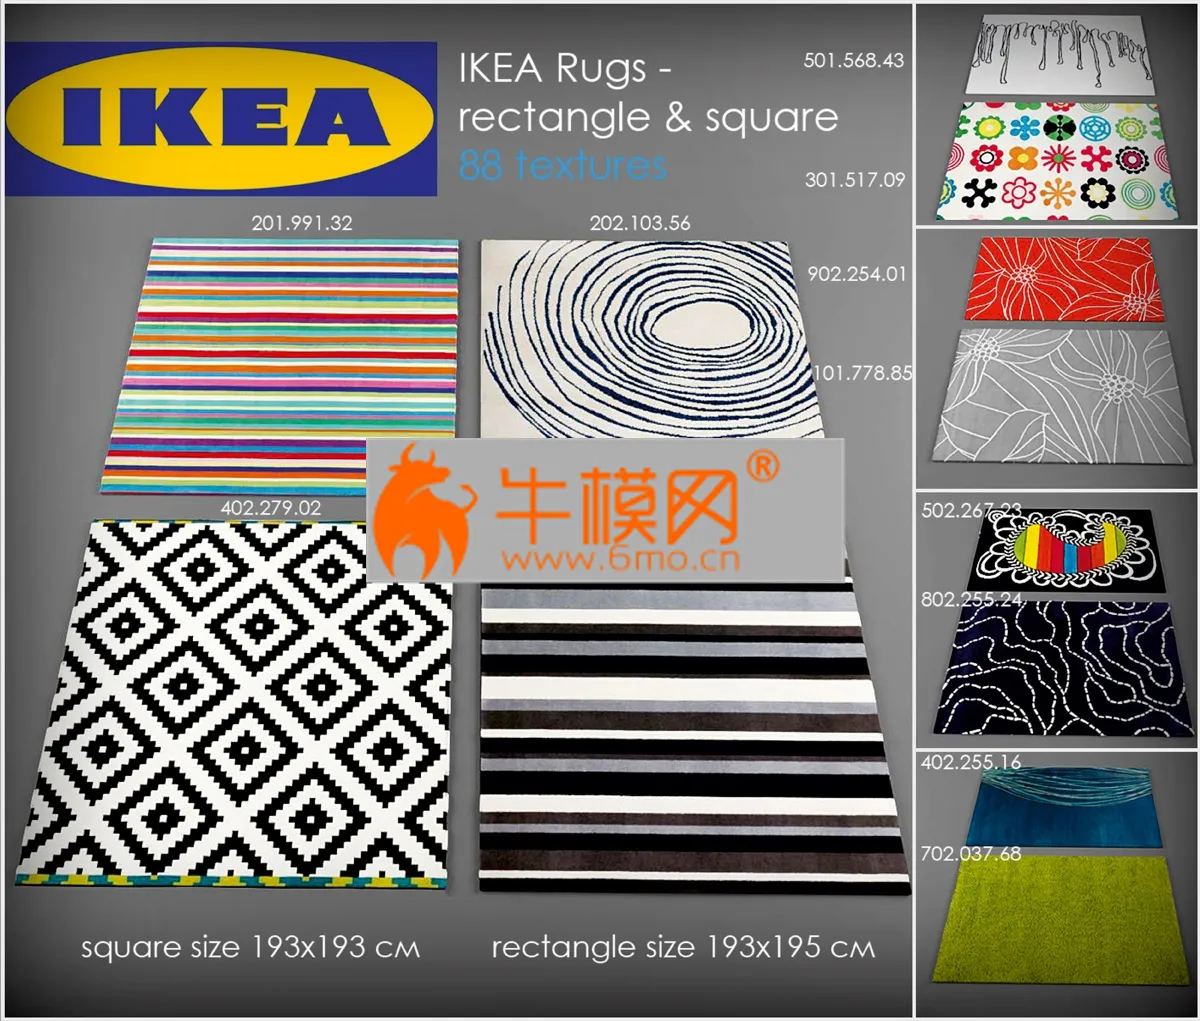 IKEA Rugs collection – 2007